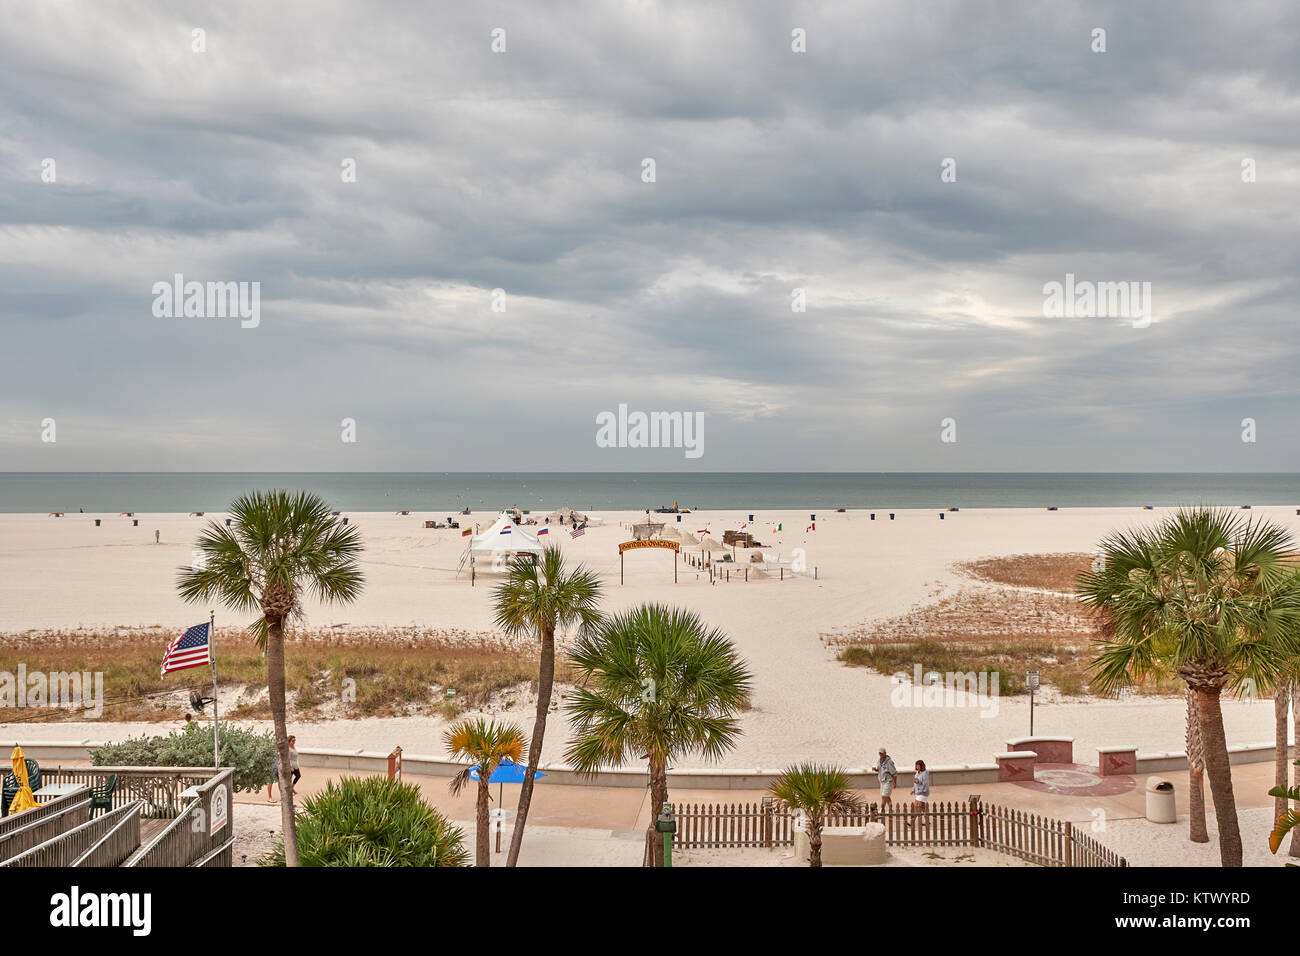 The Florida beach on Treasure Island getting ready to host the Sanding Ovations sand sculpture contest / festival, on an overcast day, Florida USA. Stock Photo